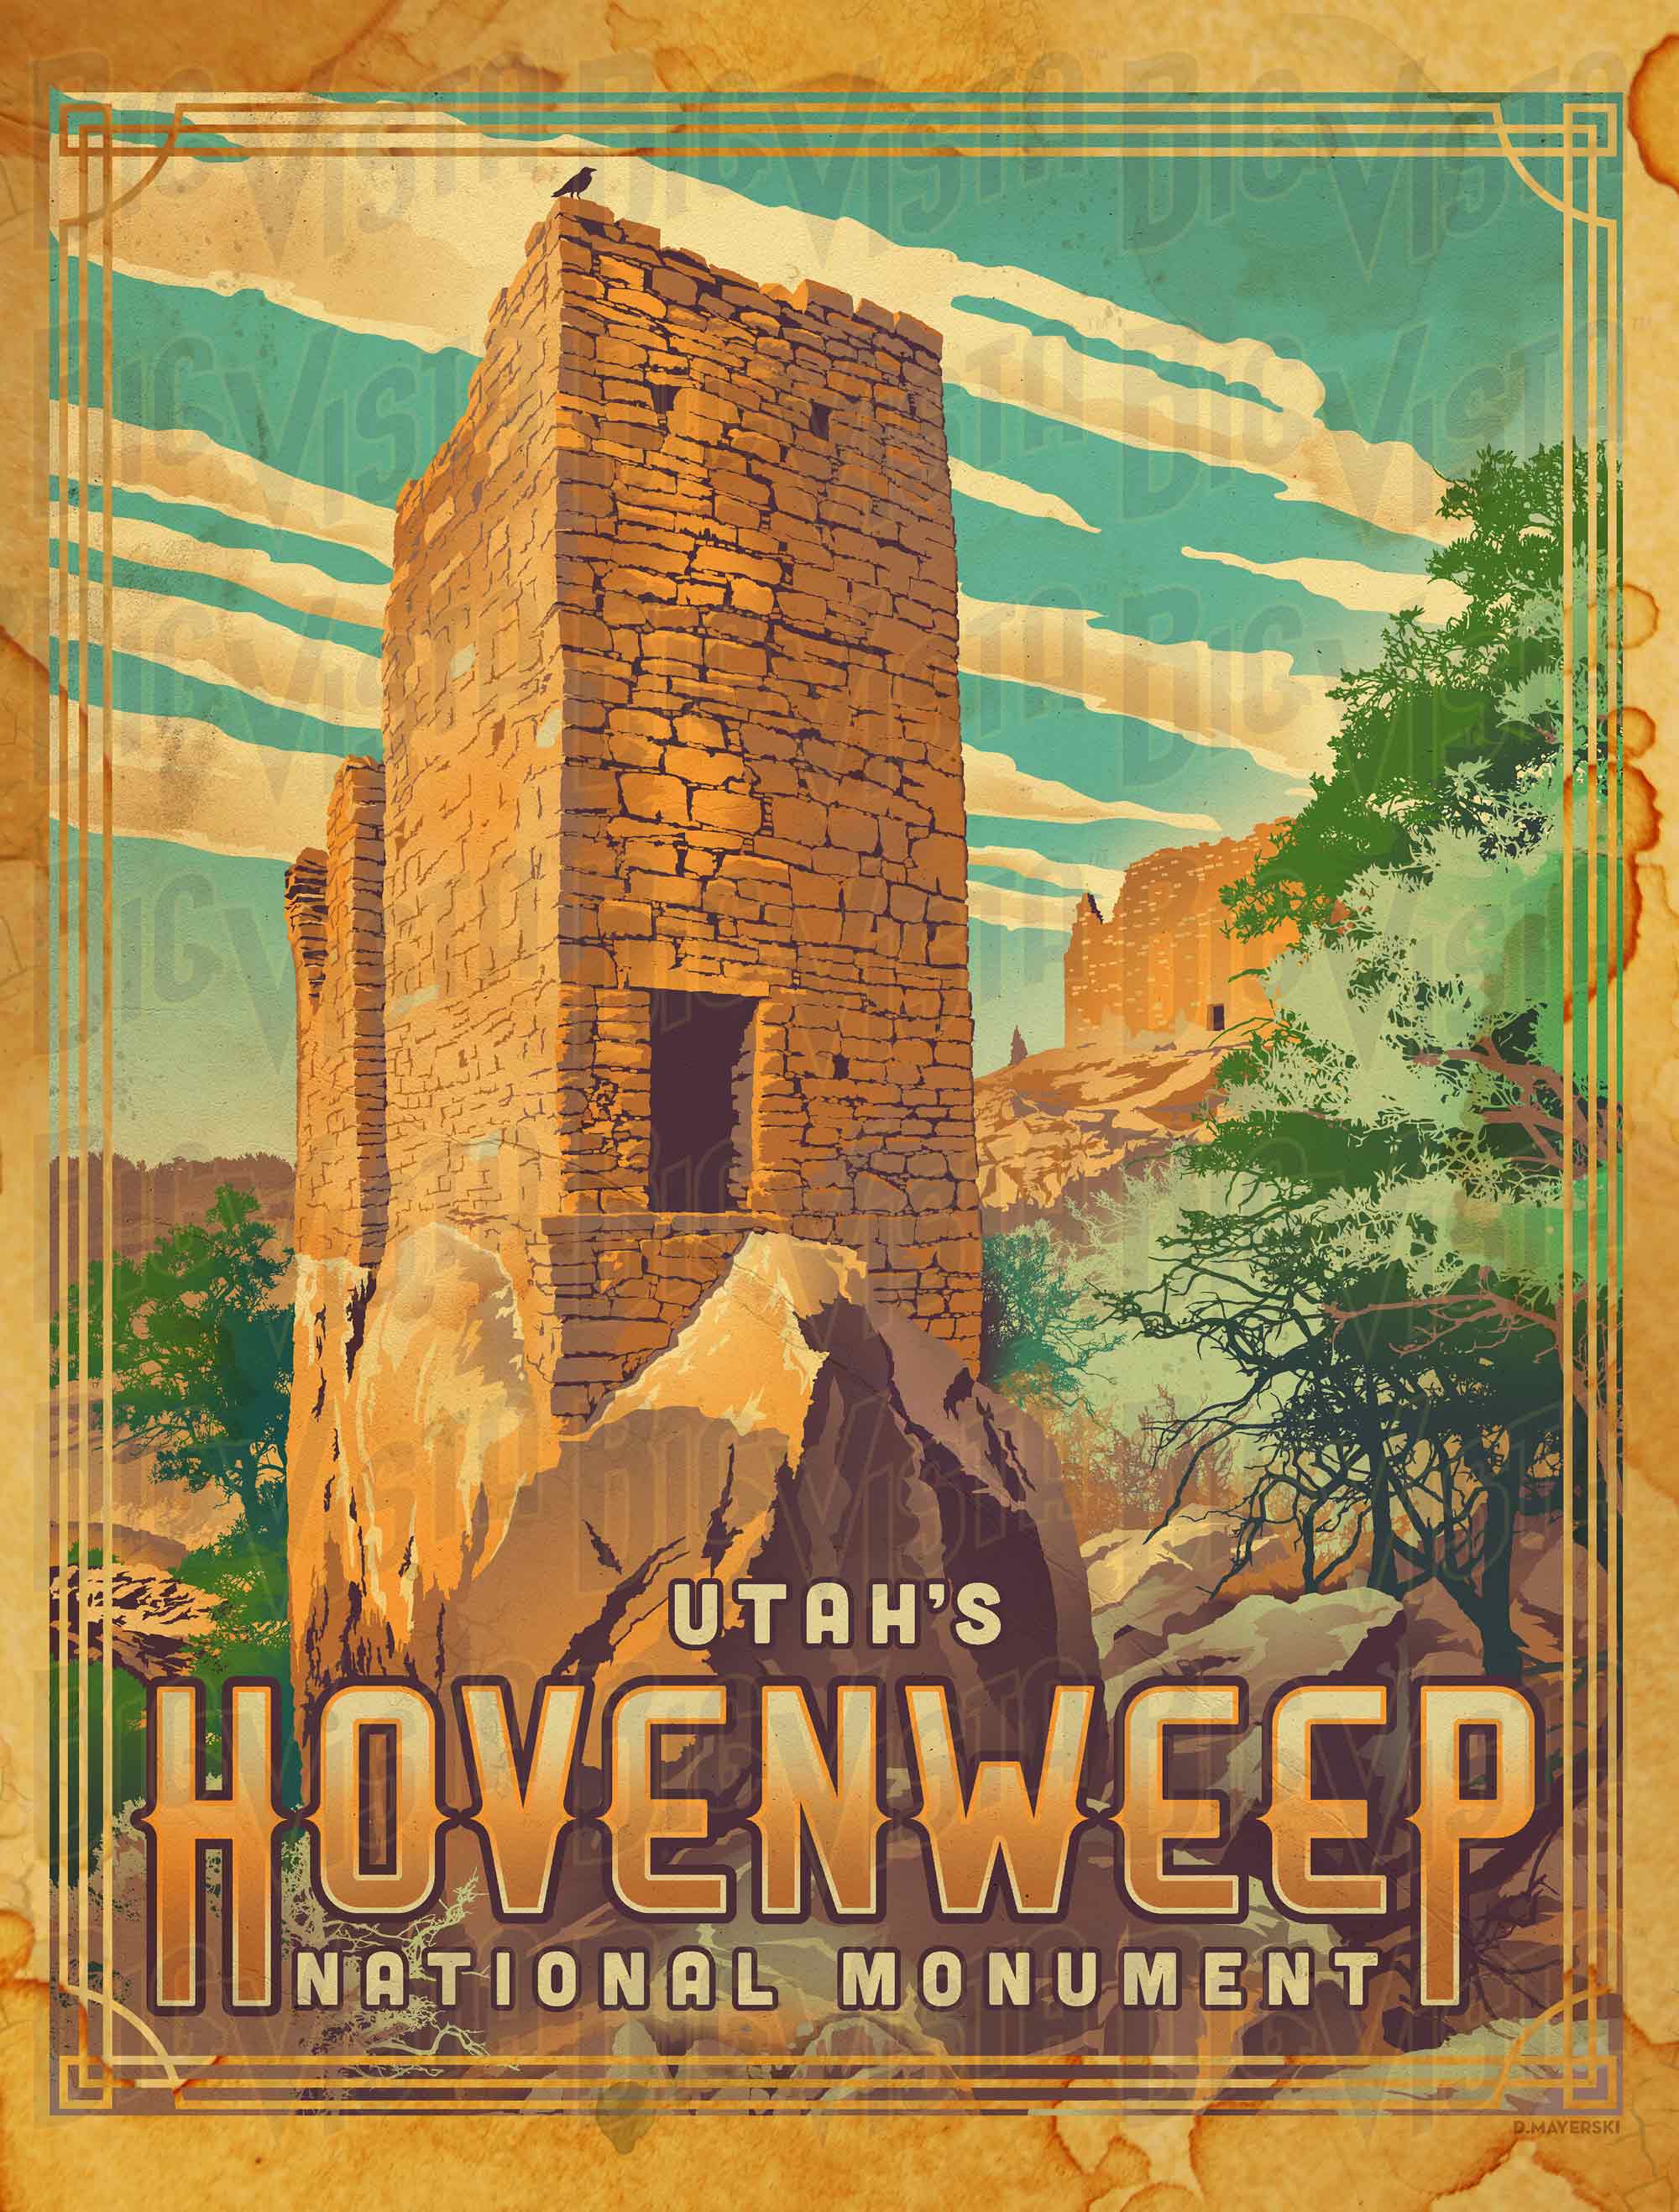 Hovenweep National Monument poster